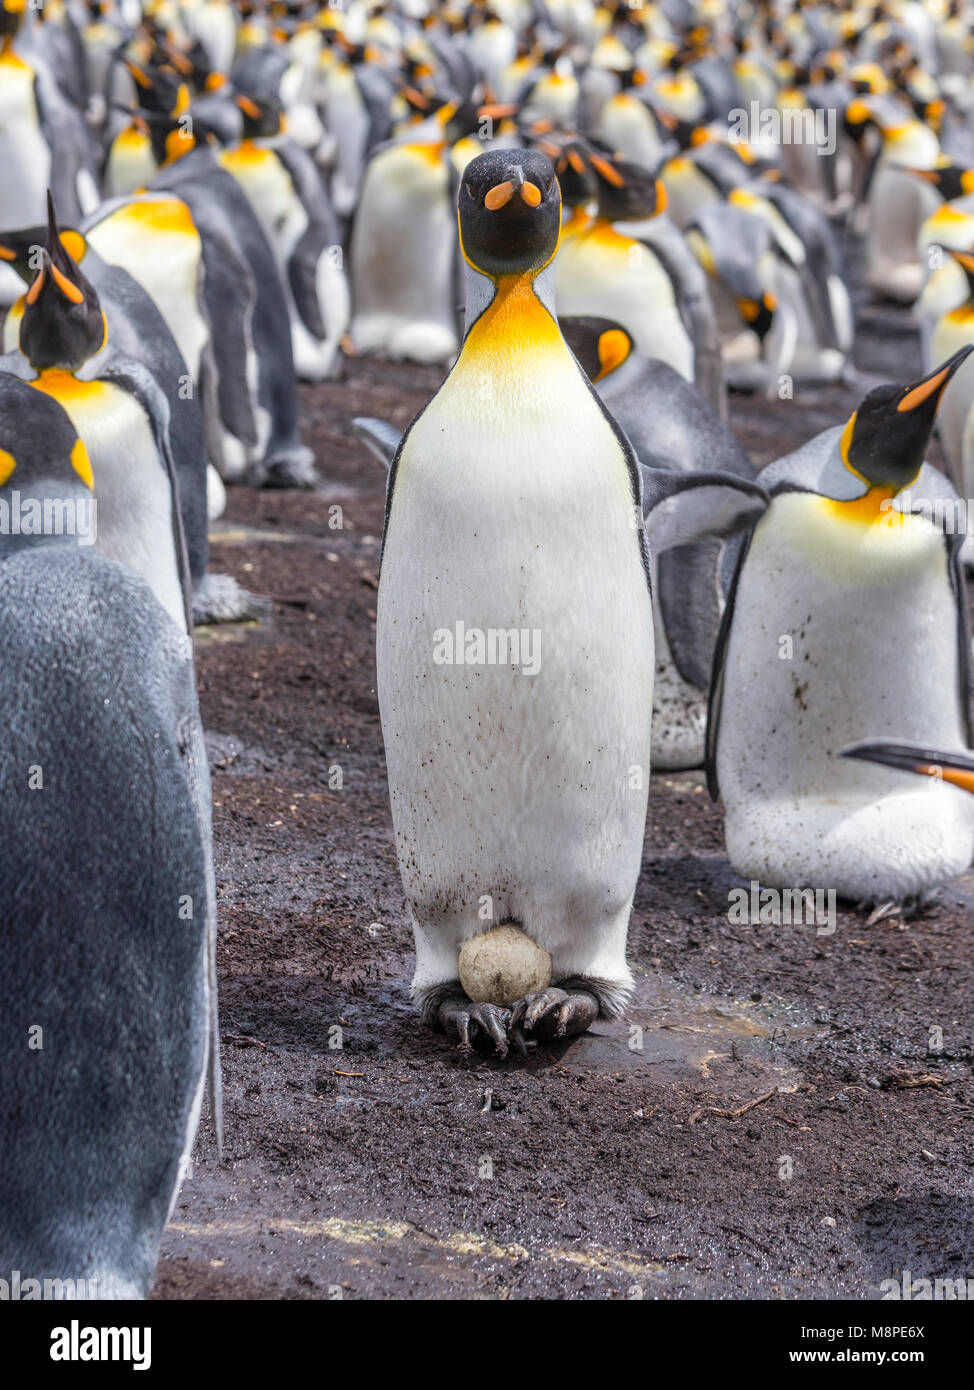 King Penguin displaying an Egg on its feet Stock Photo